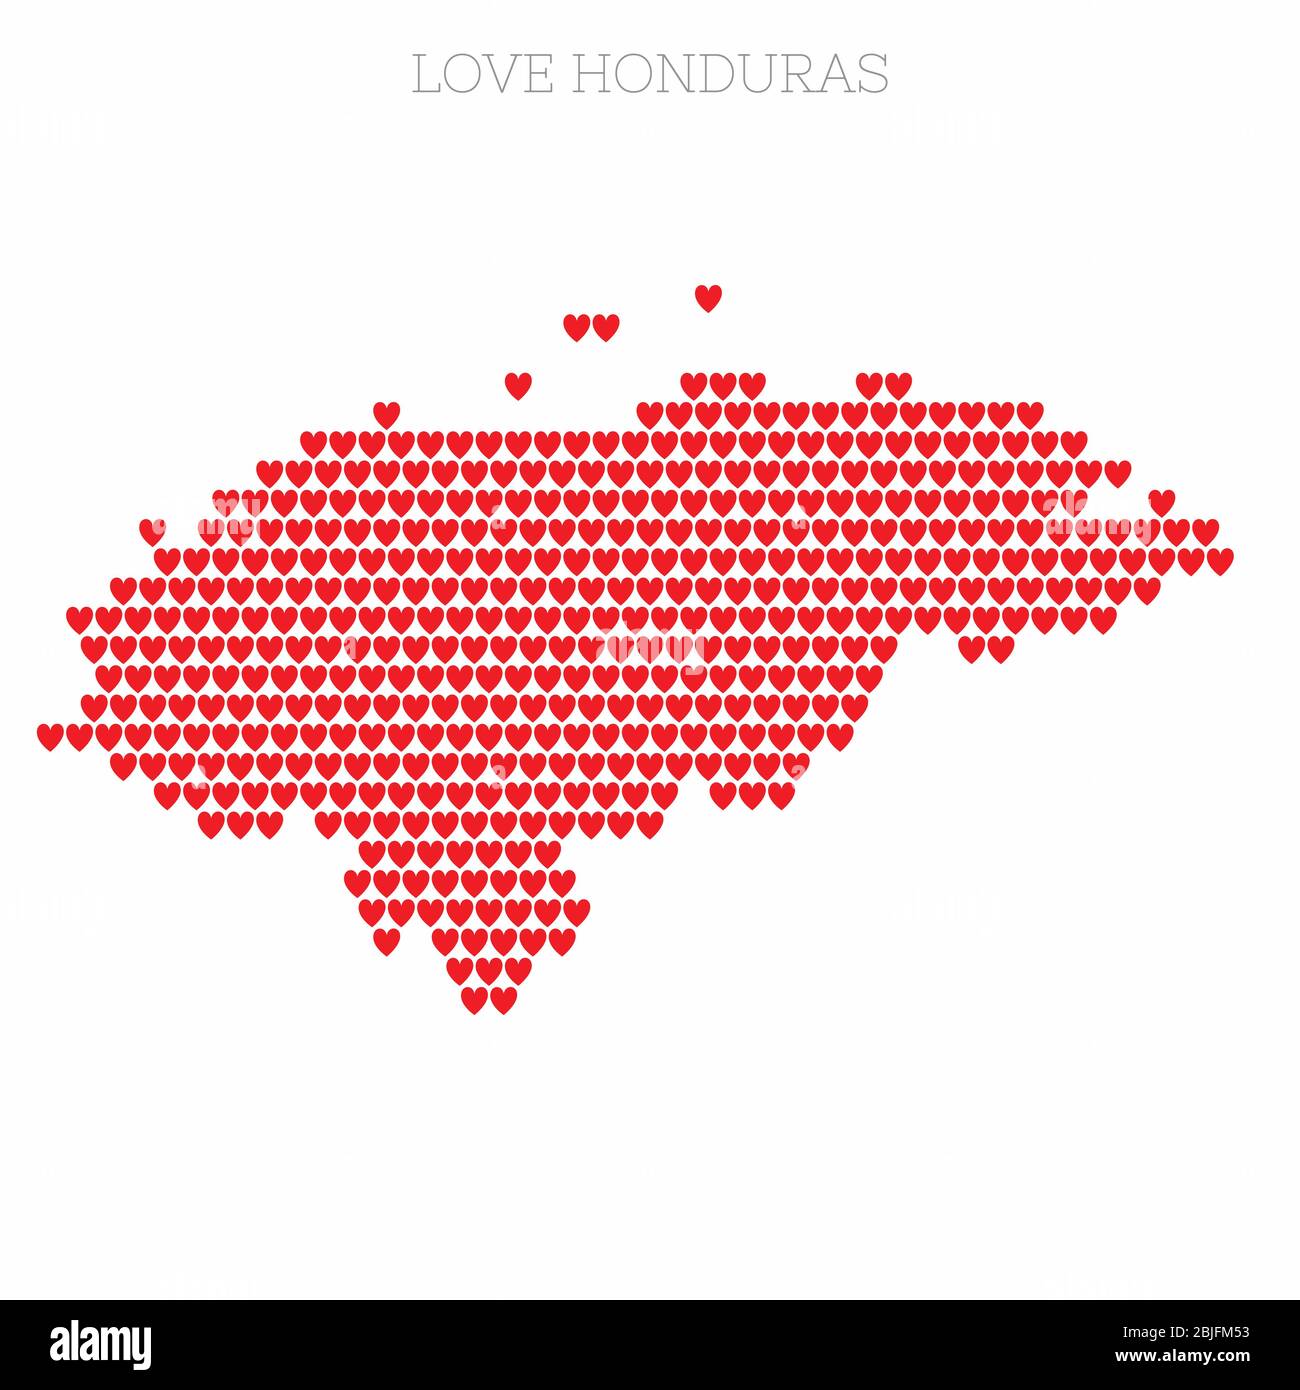 Honduras country map made from love heart halftone pattern Stock Vector